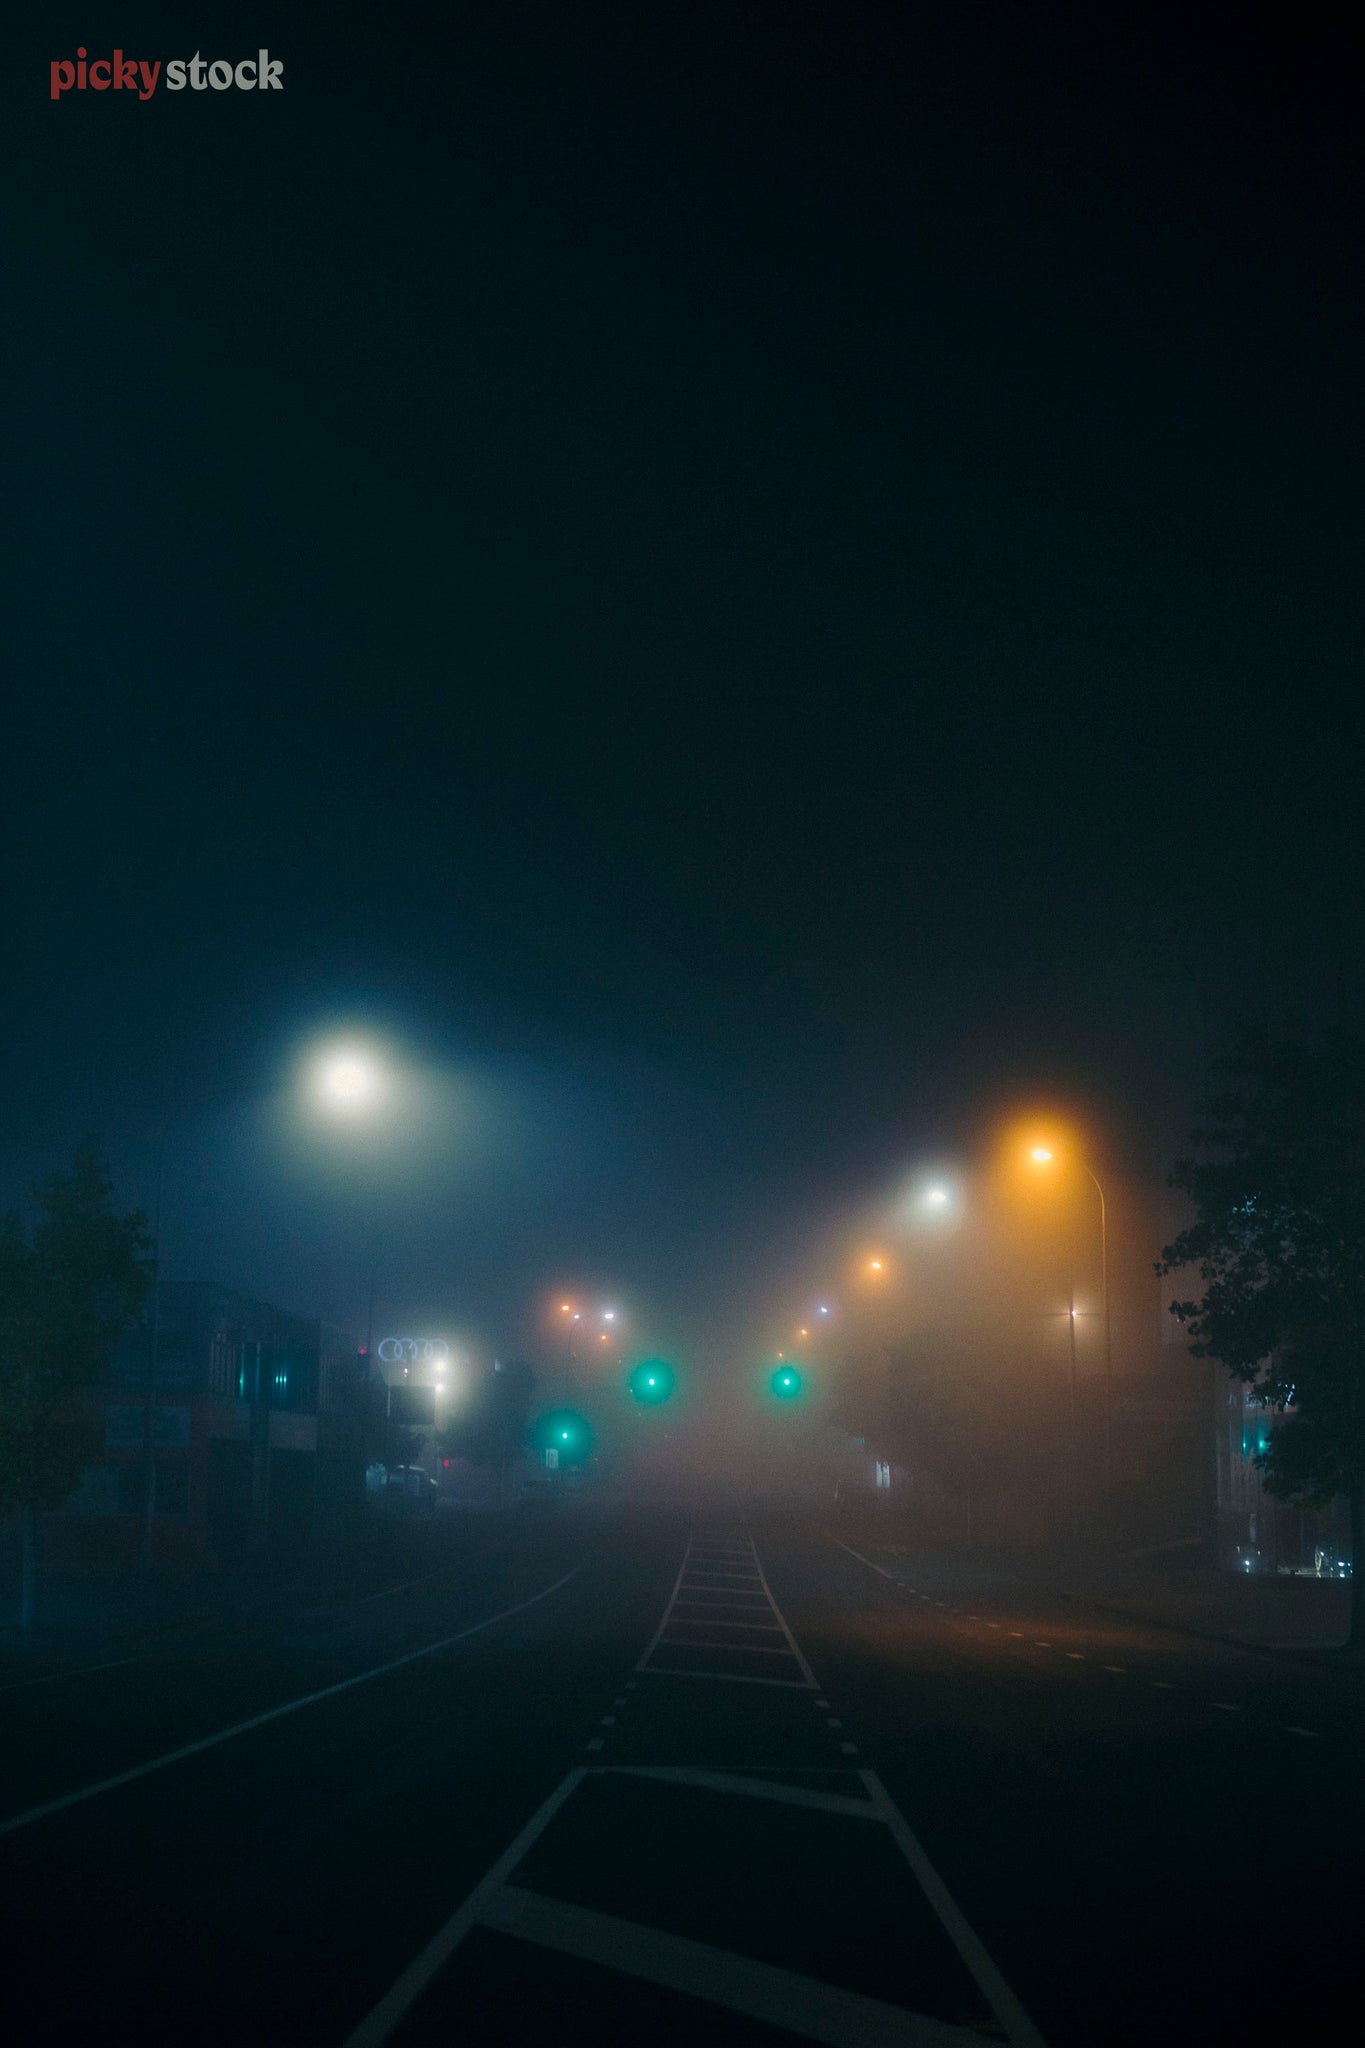 Moody coloured traffic lights peek through the mist and haze early morning or late at night. 